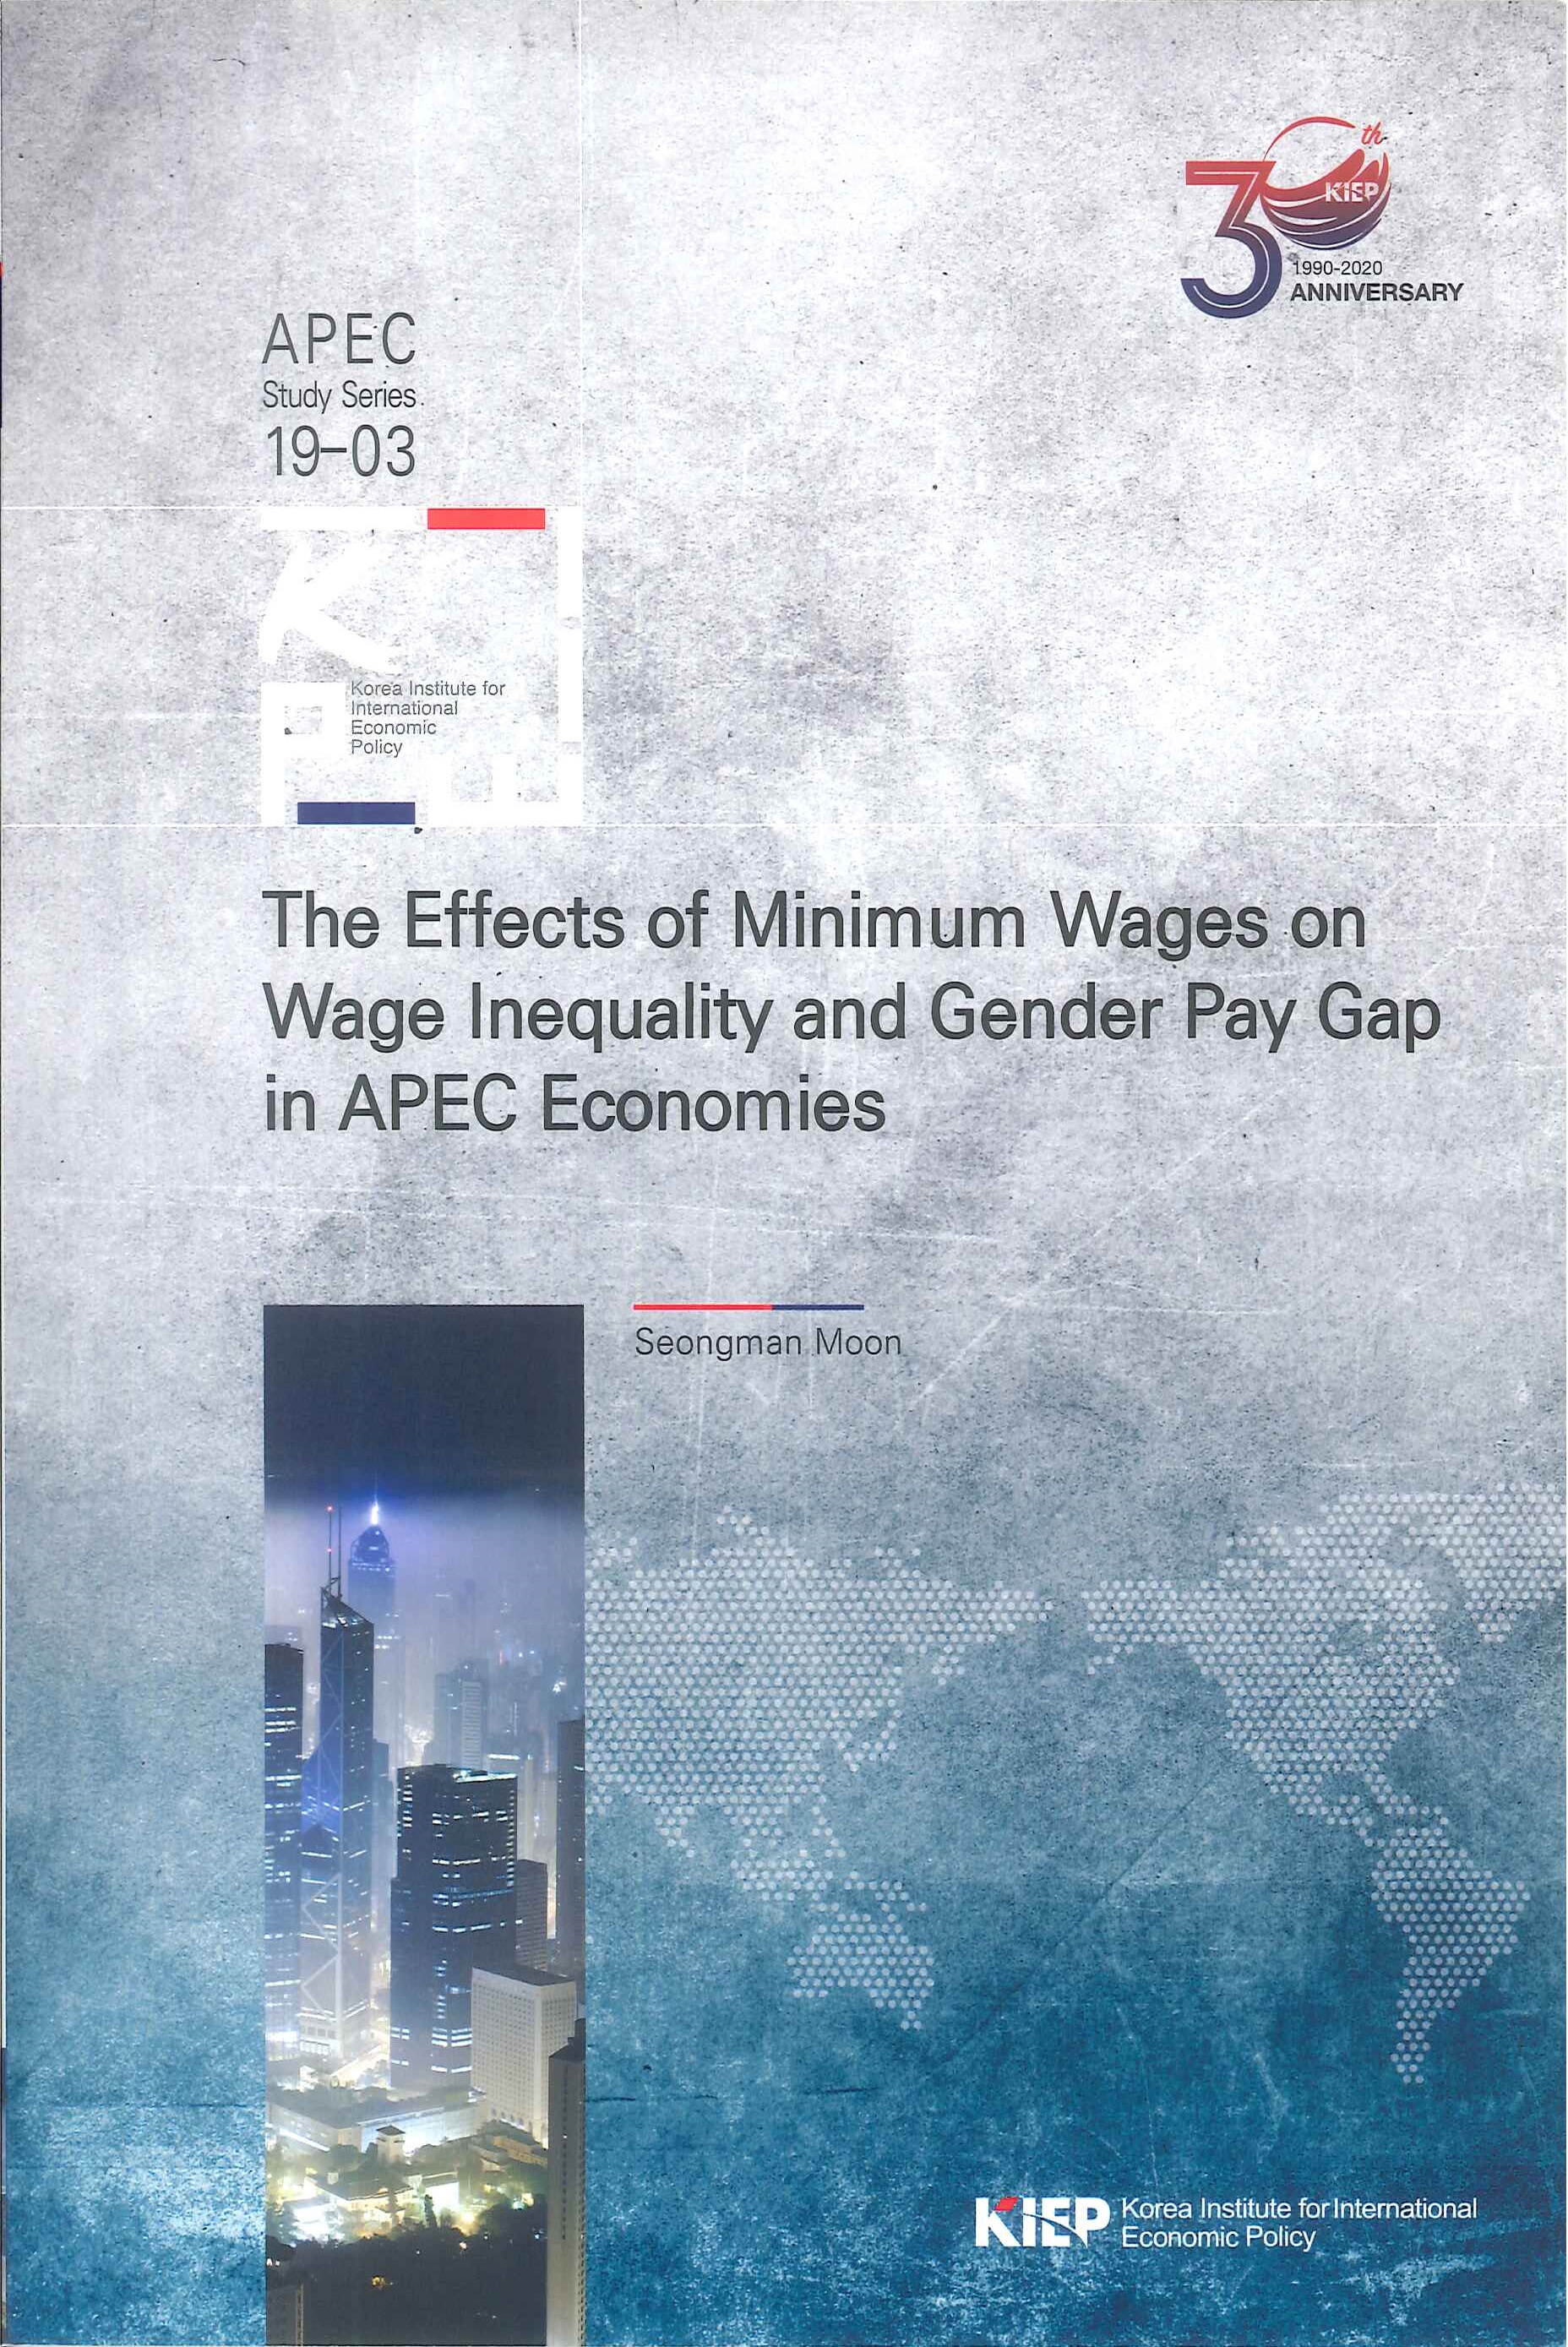 The effects of minimum wages on wage inequality and gender pay gap in APEC economies